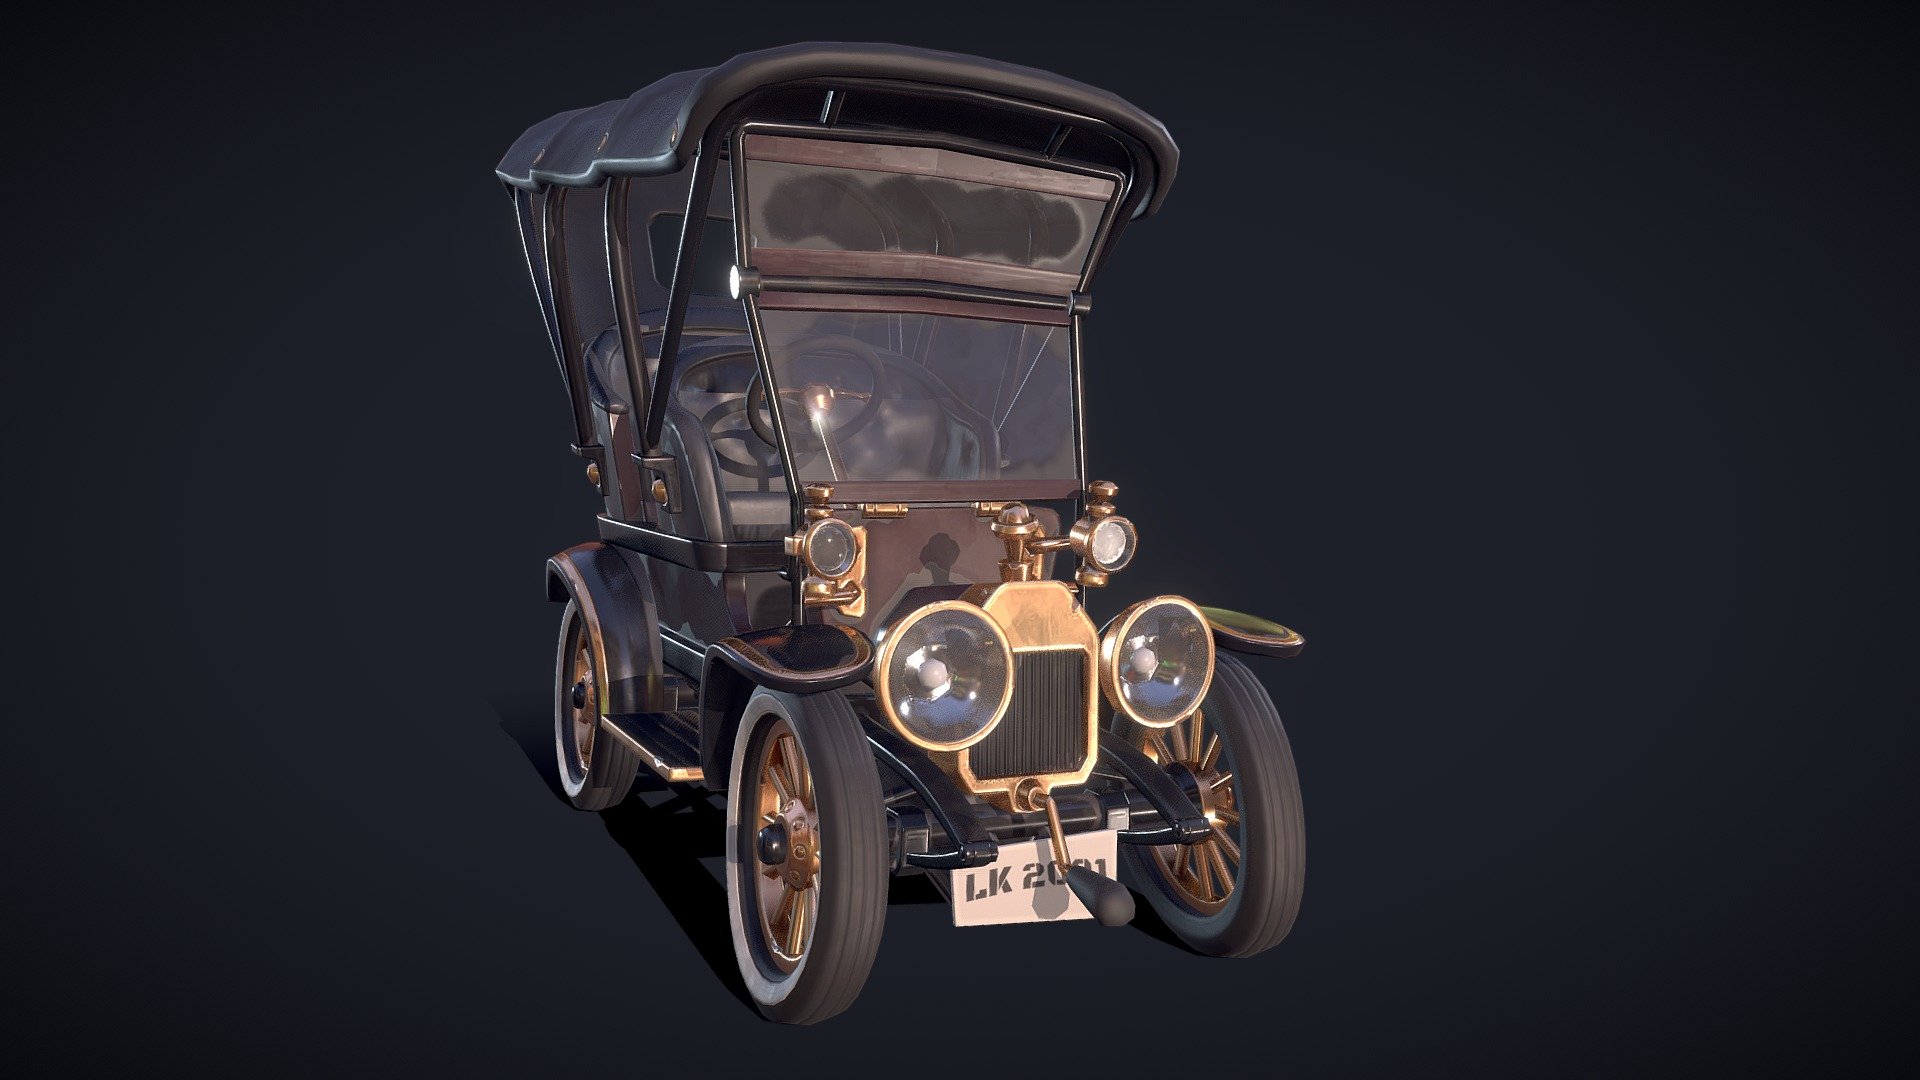 A stylized vintage car I designed and modelled inspired by a variety of cars from the 19th century. Modelled in 3ds Max and textured in Substance Painter! - Vintage Car - 3D model by Lars Korden (@Lark.Art) 3d model